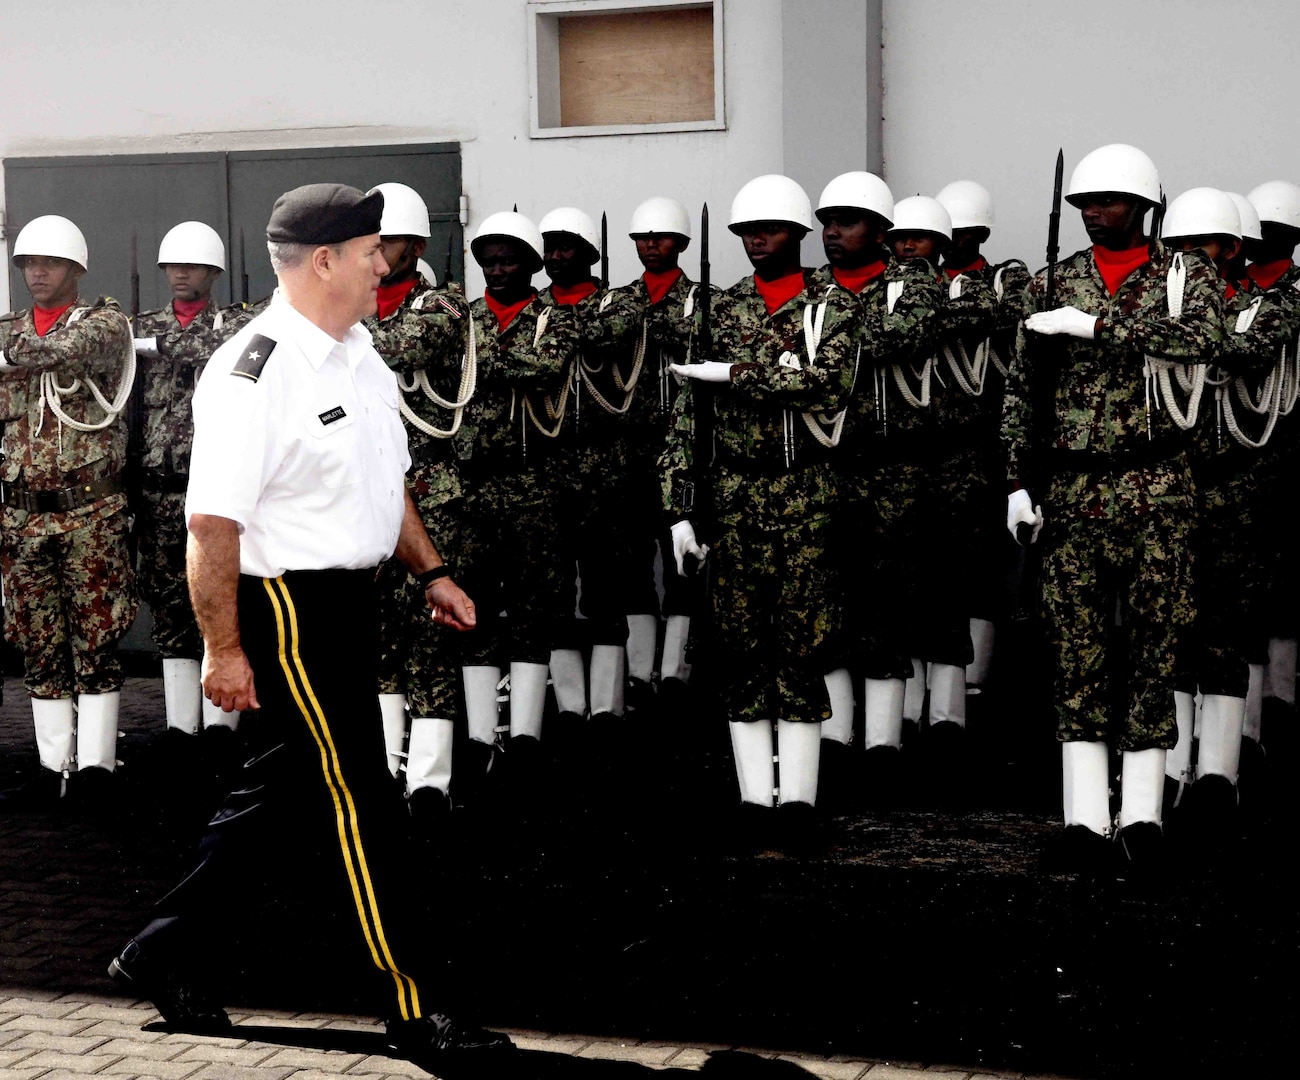 U.S. Army Maj. Gen. Jeff Marlette, South Dakota National Guard adjutant general, conducts a pass and review of Suriname Defense Force service members in Paramaribo, Suriname, Nov. 22, 2019. SDNG and SDF officials conducted a senior leader engagement as part of the State Partnership Program, which seeks to support security cooperation relationships by sharing experiences and best practices.